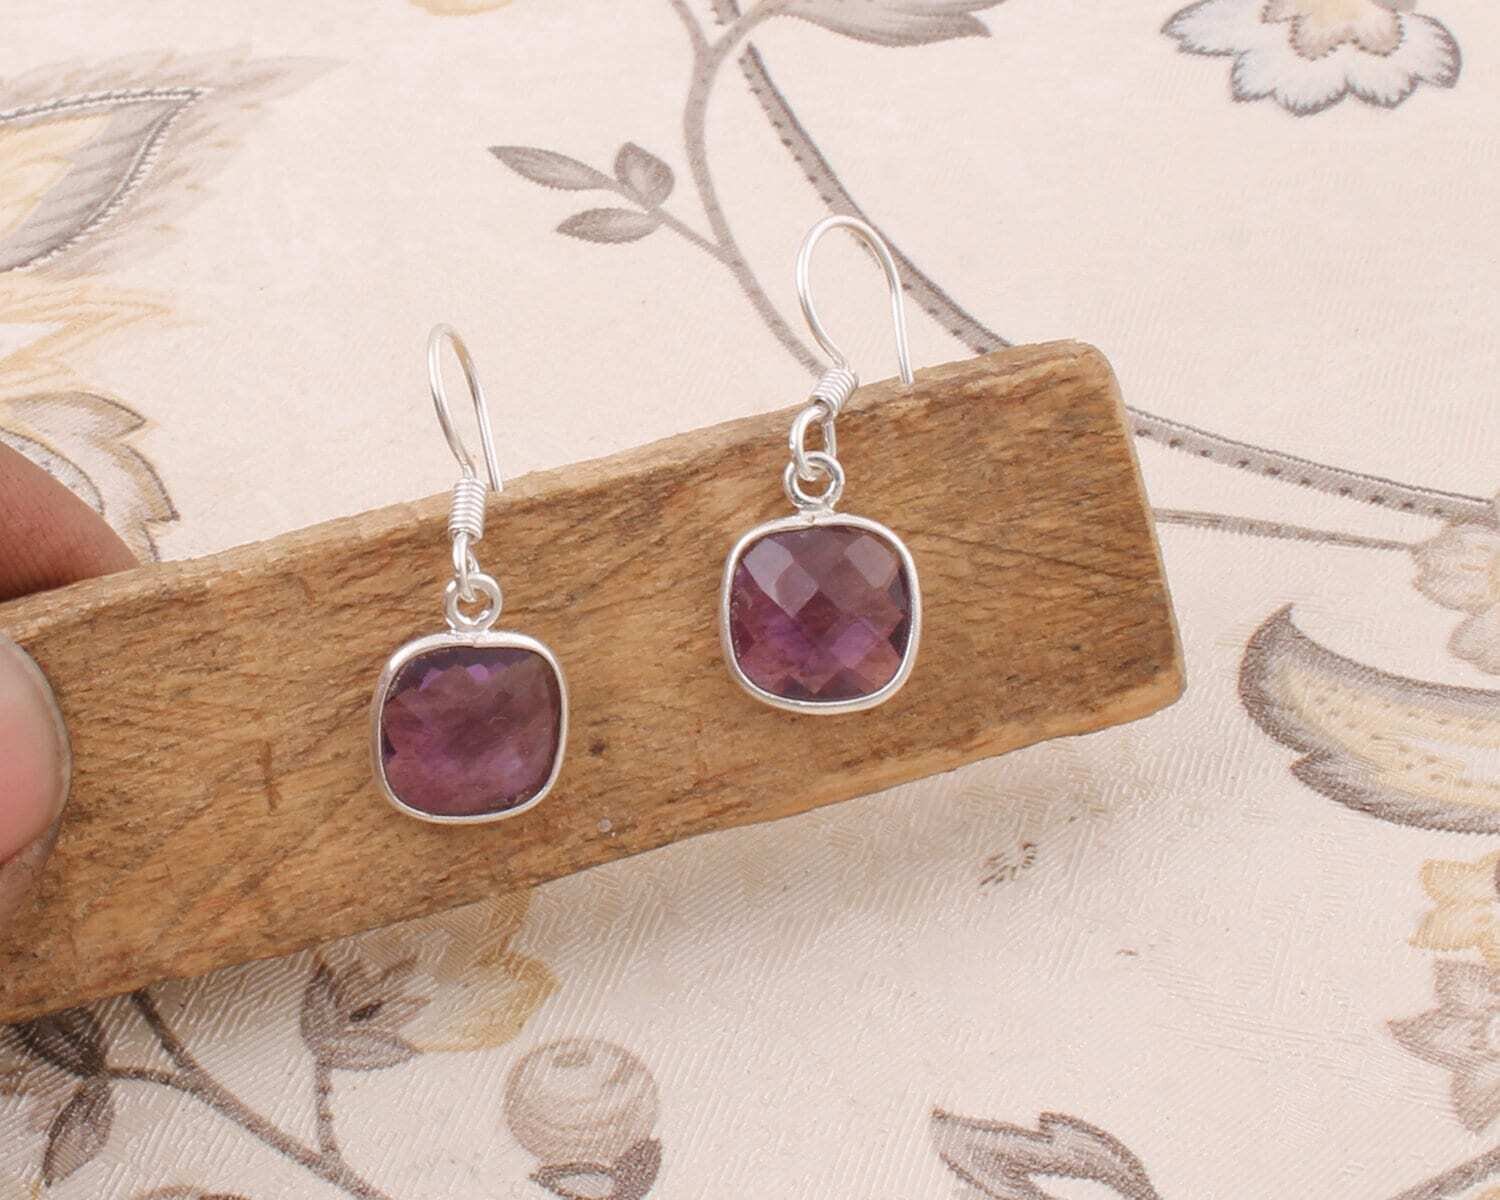 Gift For You ! Solid 925-Silver Sterling Earring With Natural Amethyst Gemstone Earring Cut Stone Boho Earring Handcrafted Charm Earring